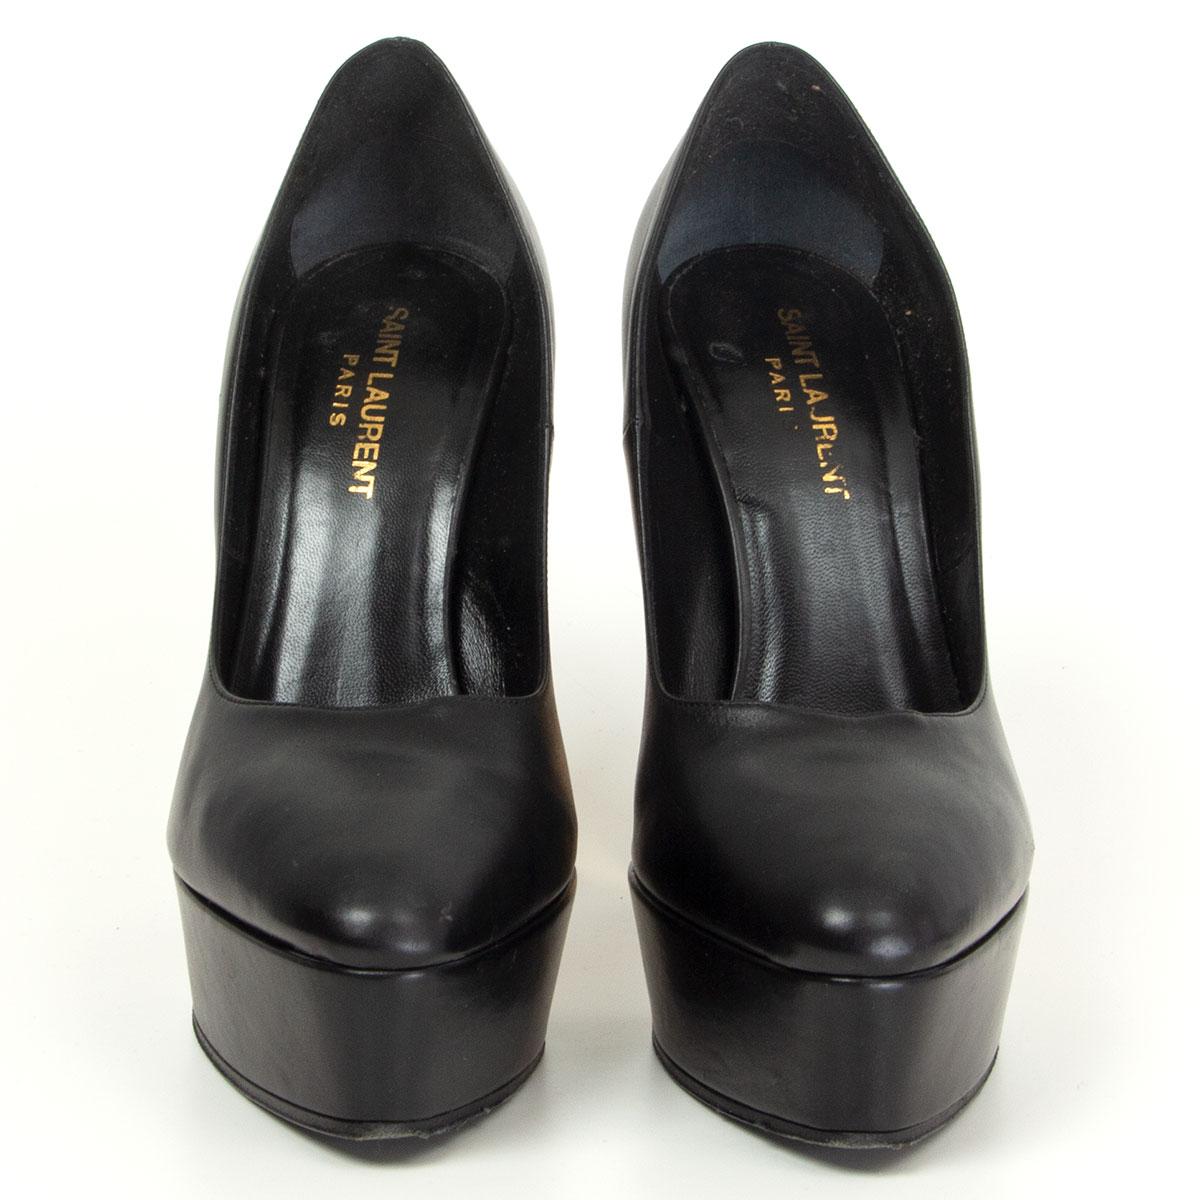 100% authentic Saint Laurent platform pumps in black calfskin featuring gold-tone metal heel detail. Have been worn and are in excellent condition. Come with dust bag. 

Measurements
Imprinted Size	38
Shoe Size	38
Inside Sole	25.5cm